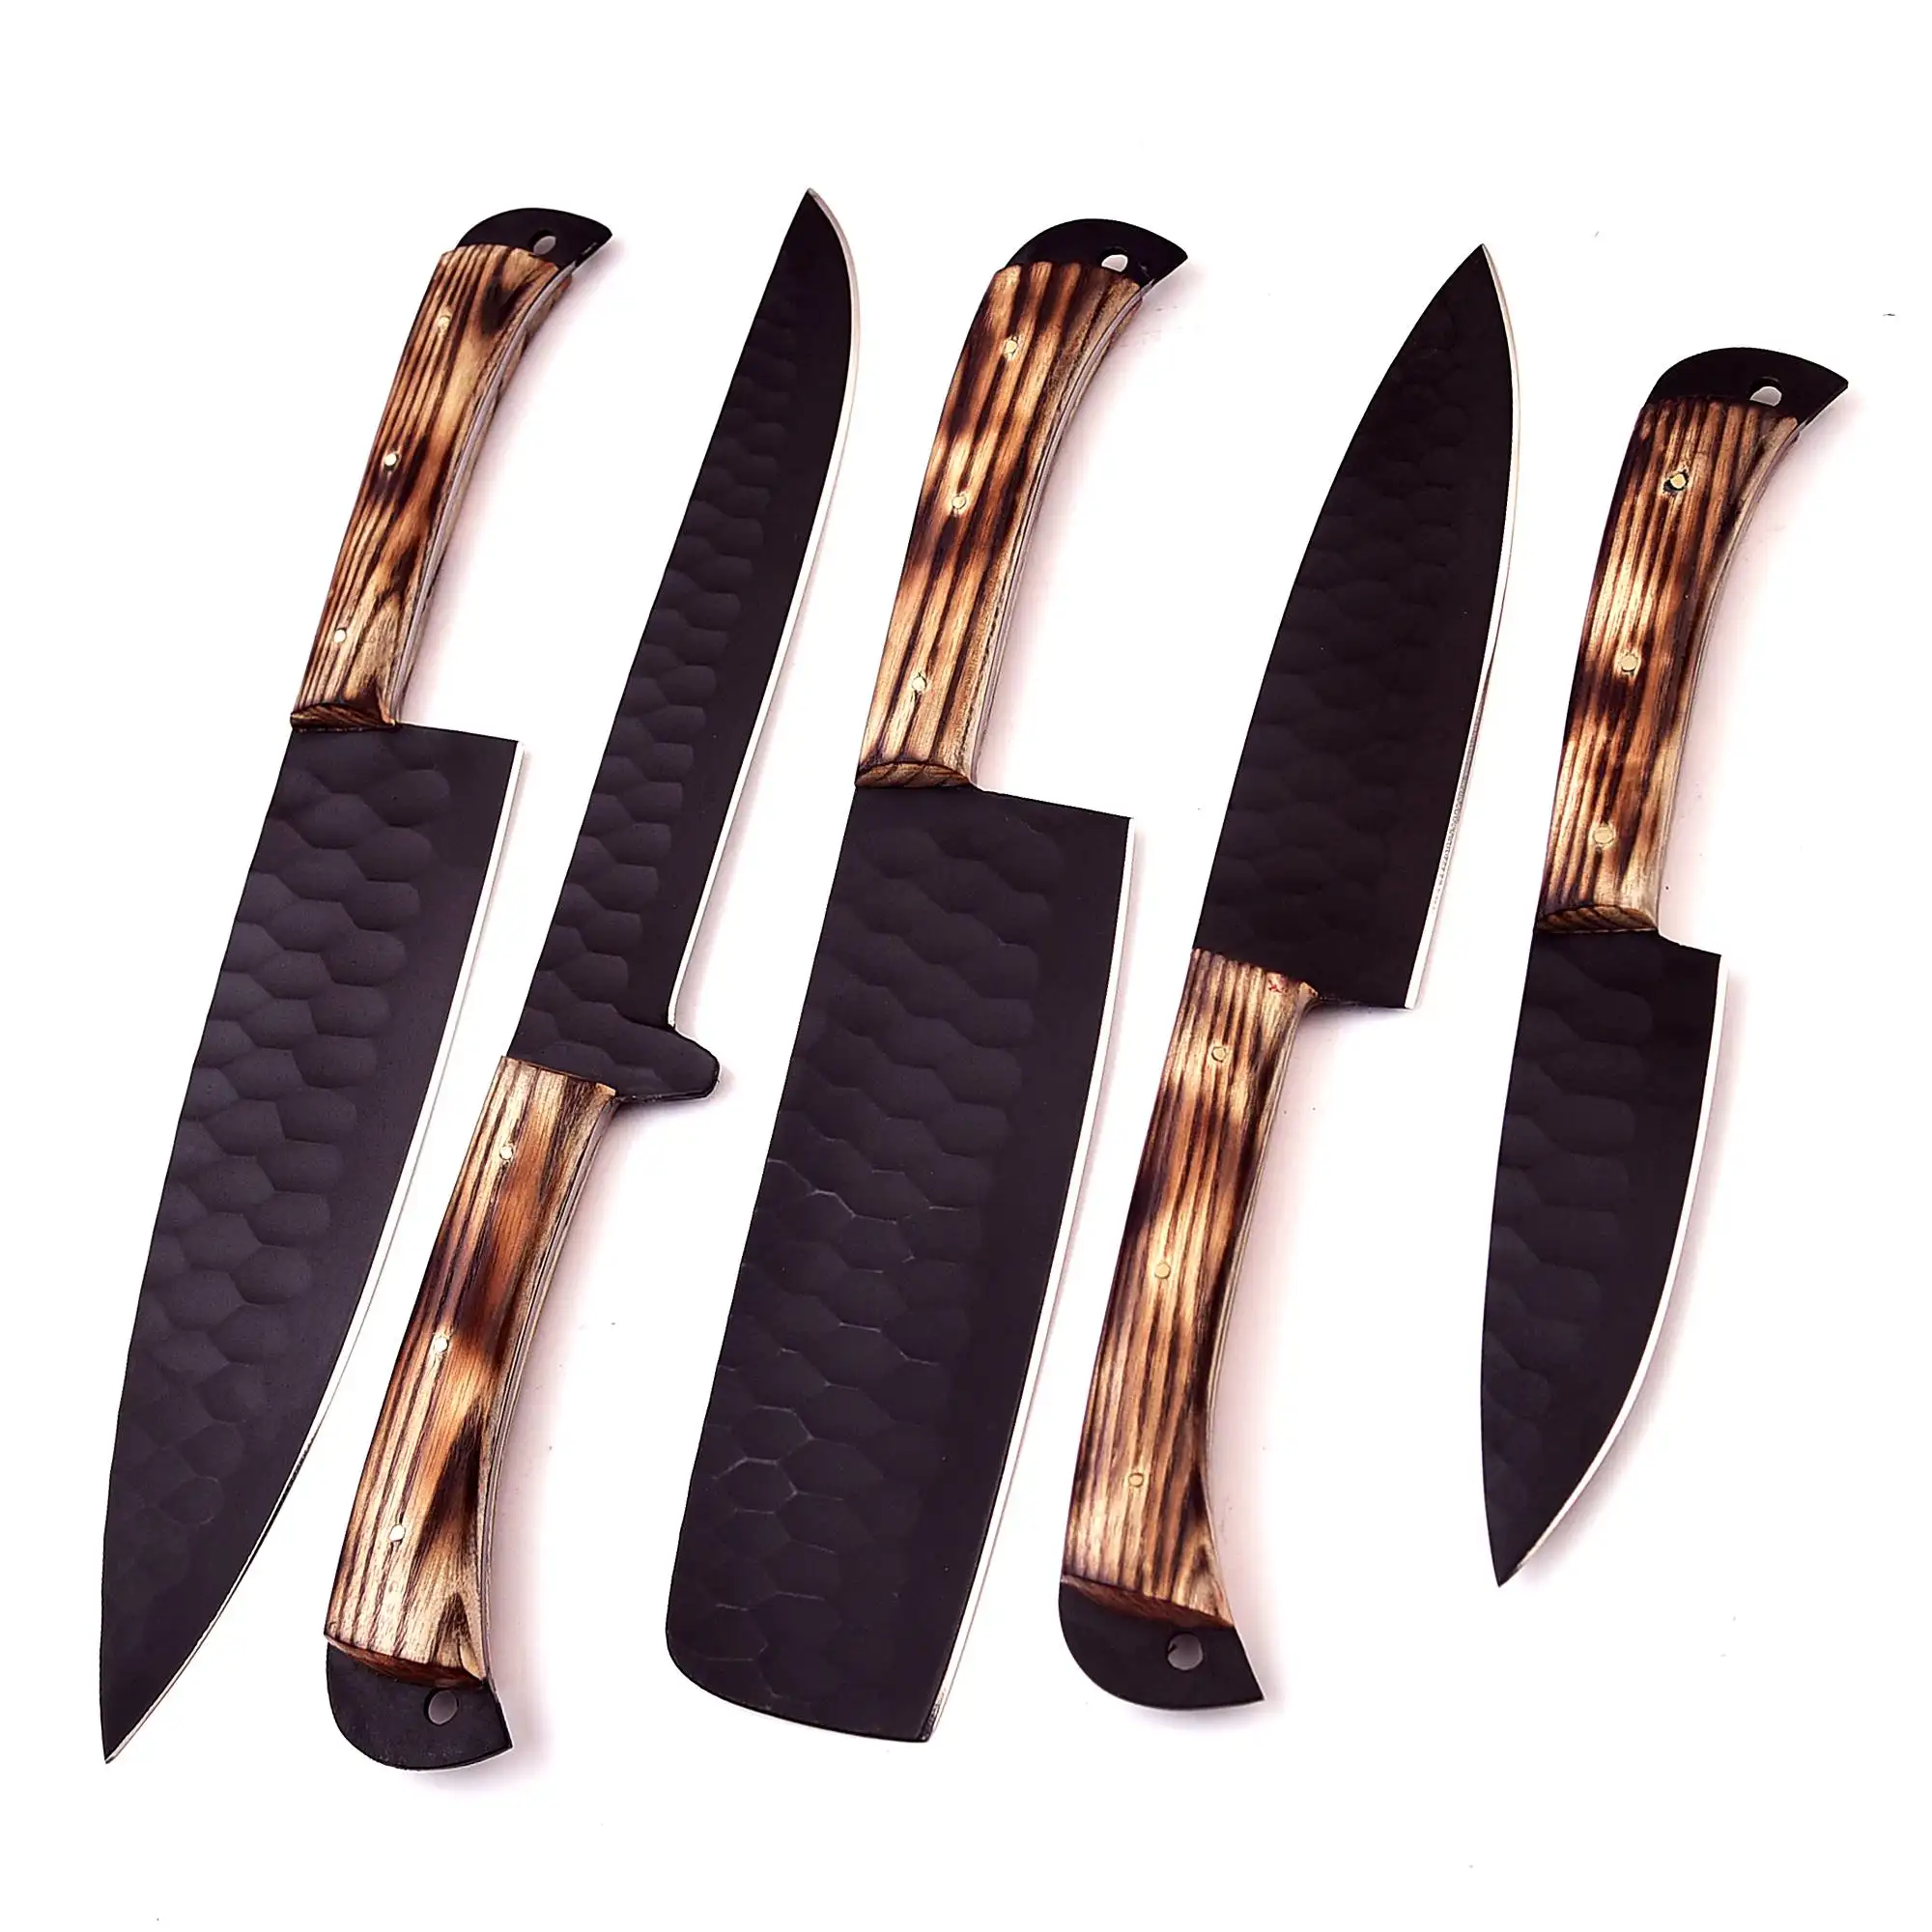 High Quality Ashwood Chef knife Set - 5 Pieces Steel and Wood Material Chef Knife